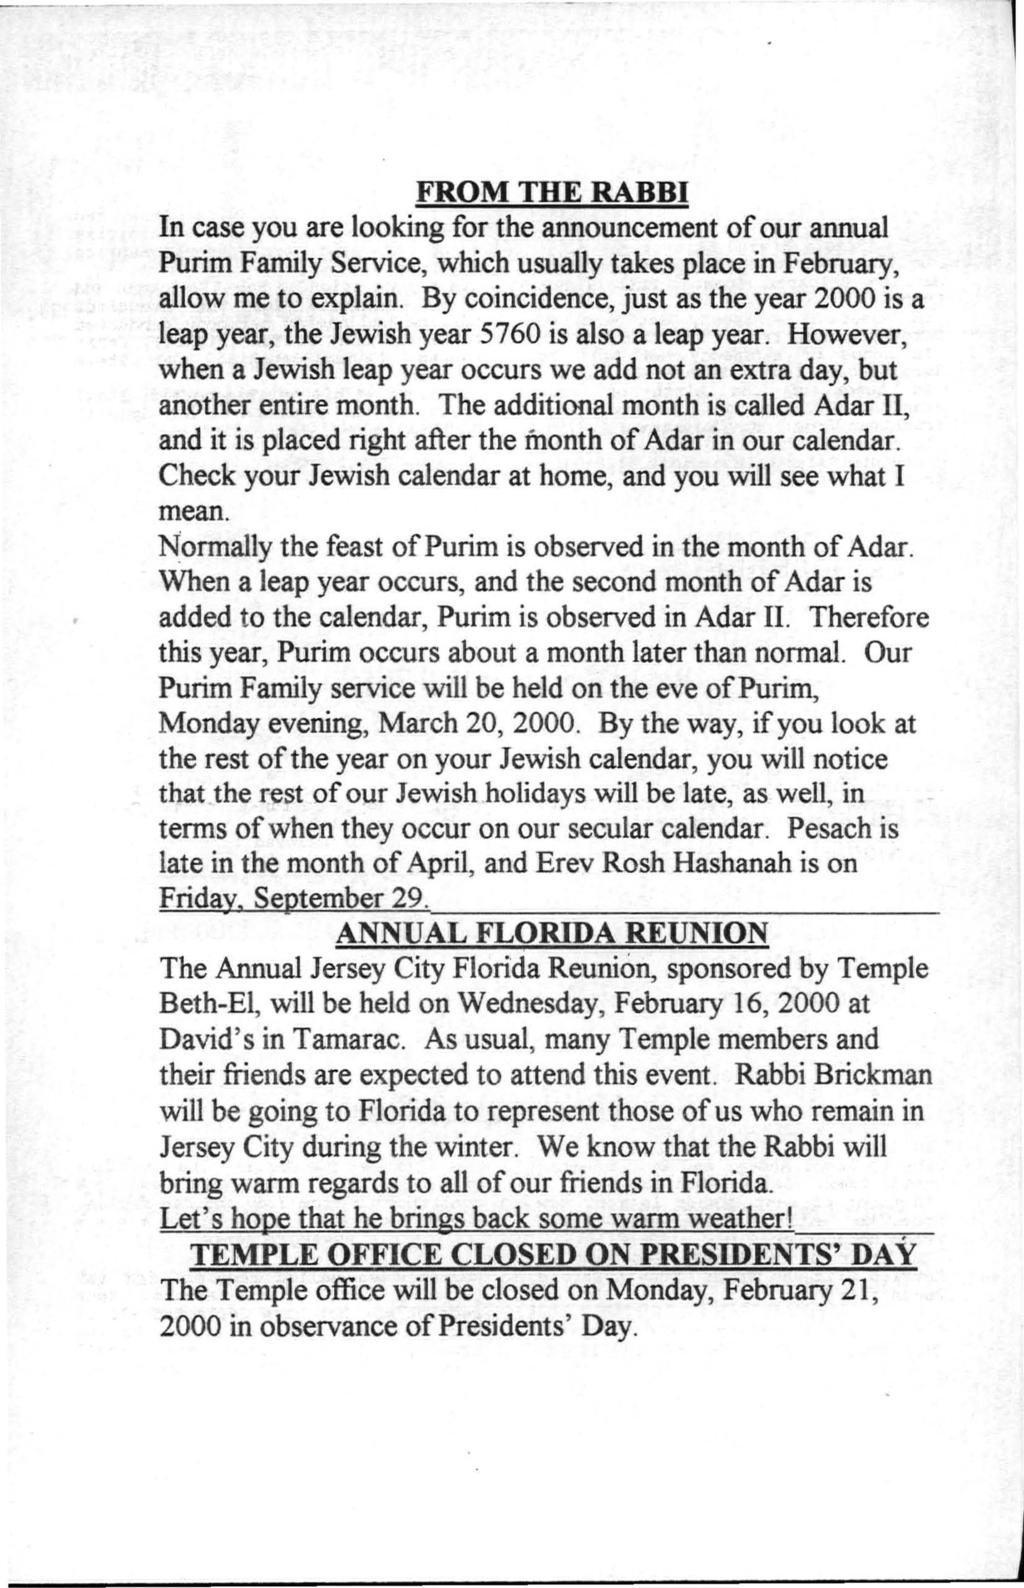 FROM THE RABBI In case you are looking for the announcement of our annual Purim Family Service, which usually takes place in February, allow me to explain.